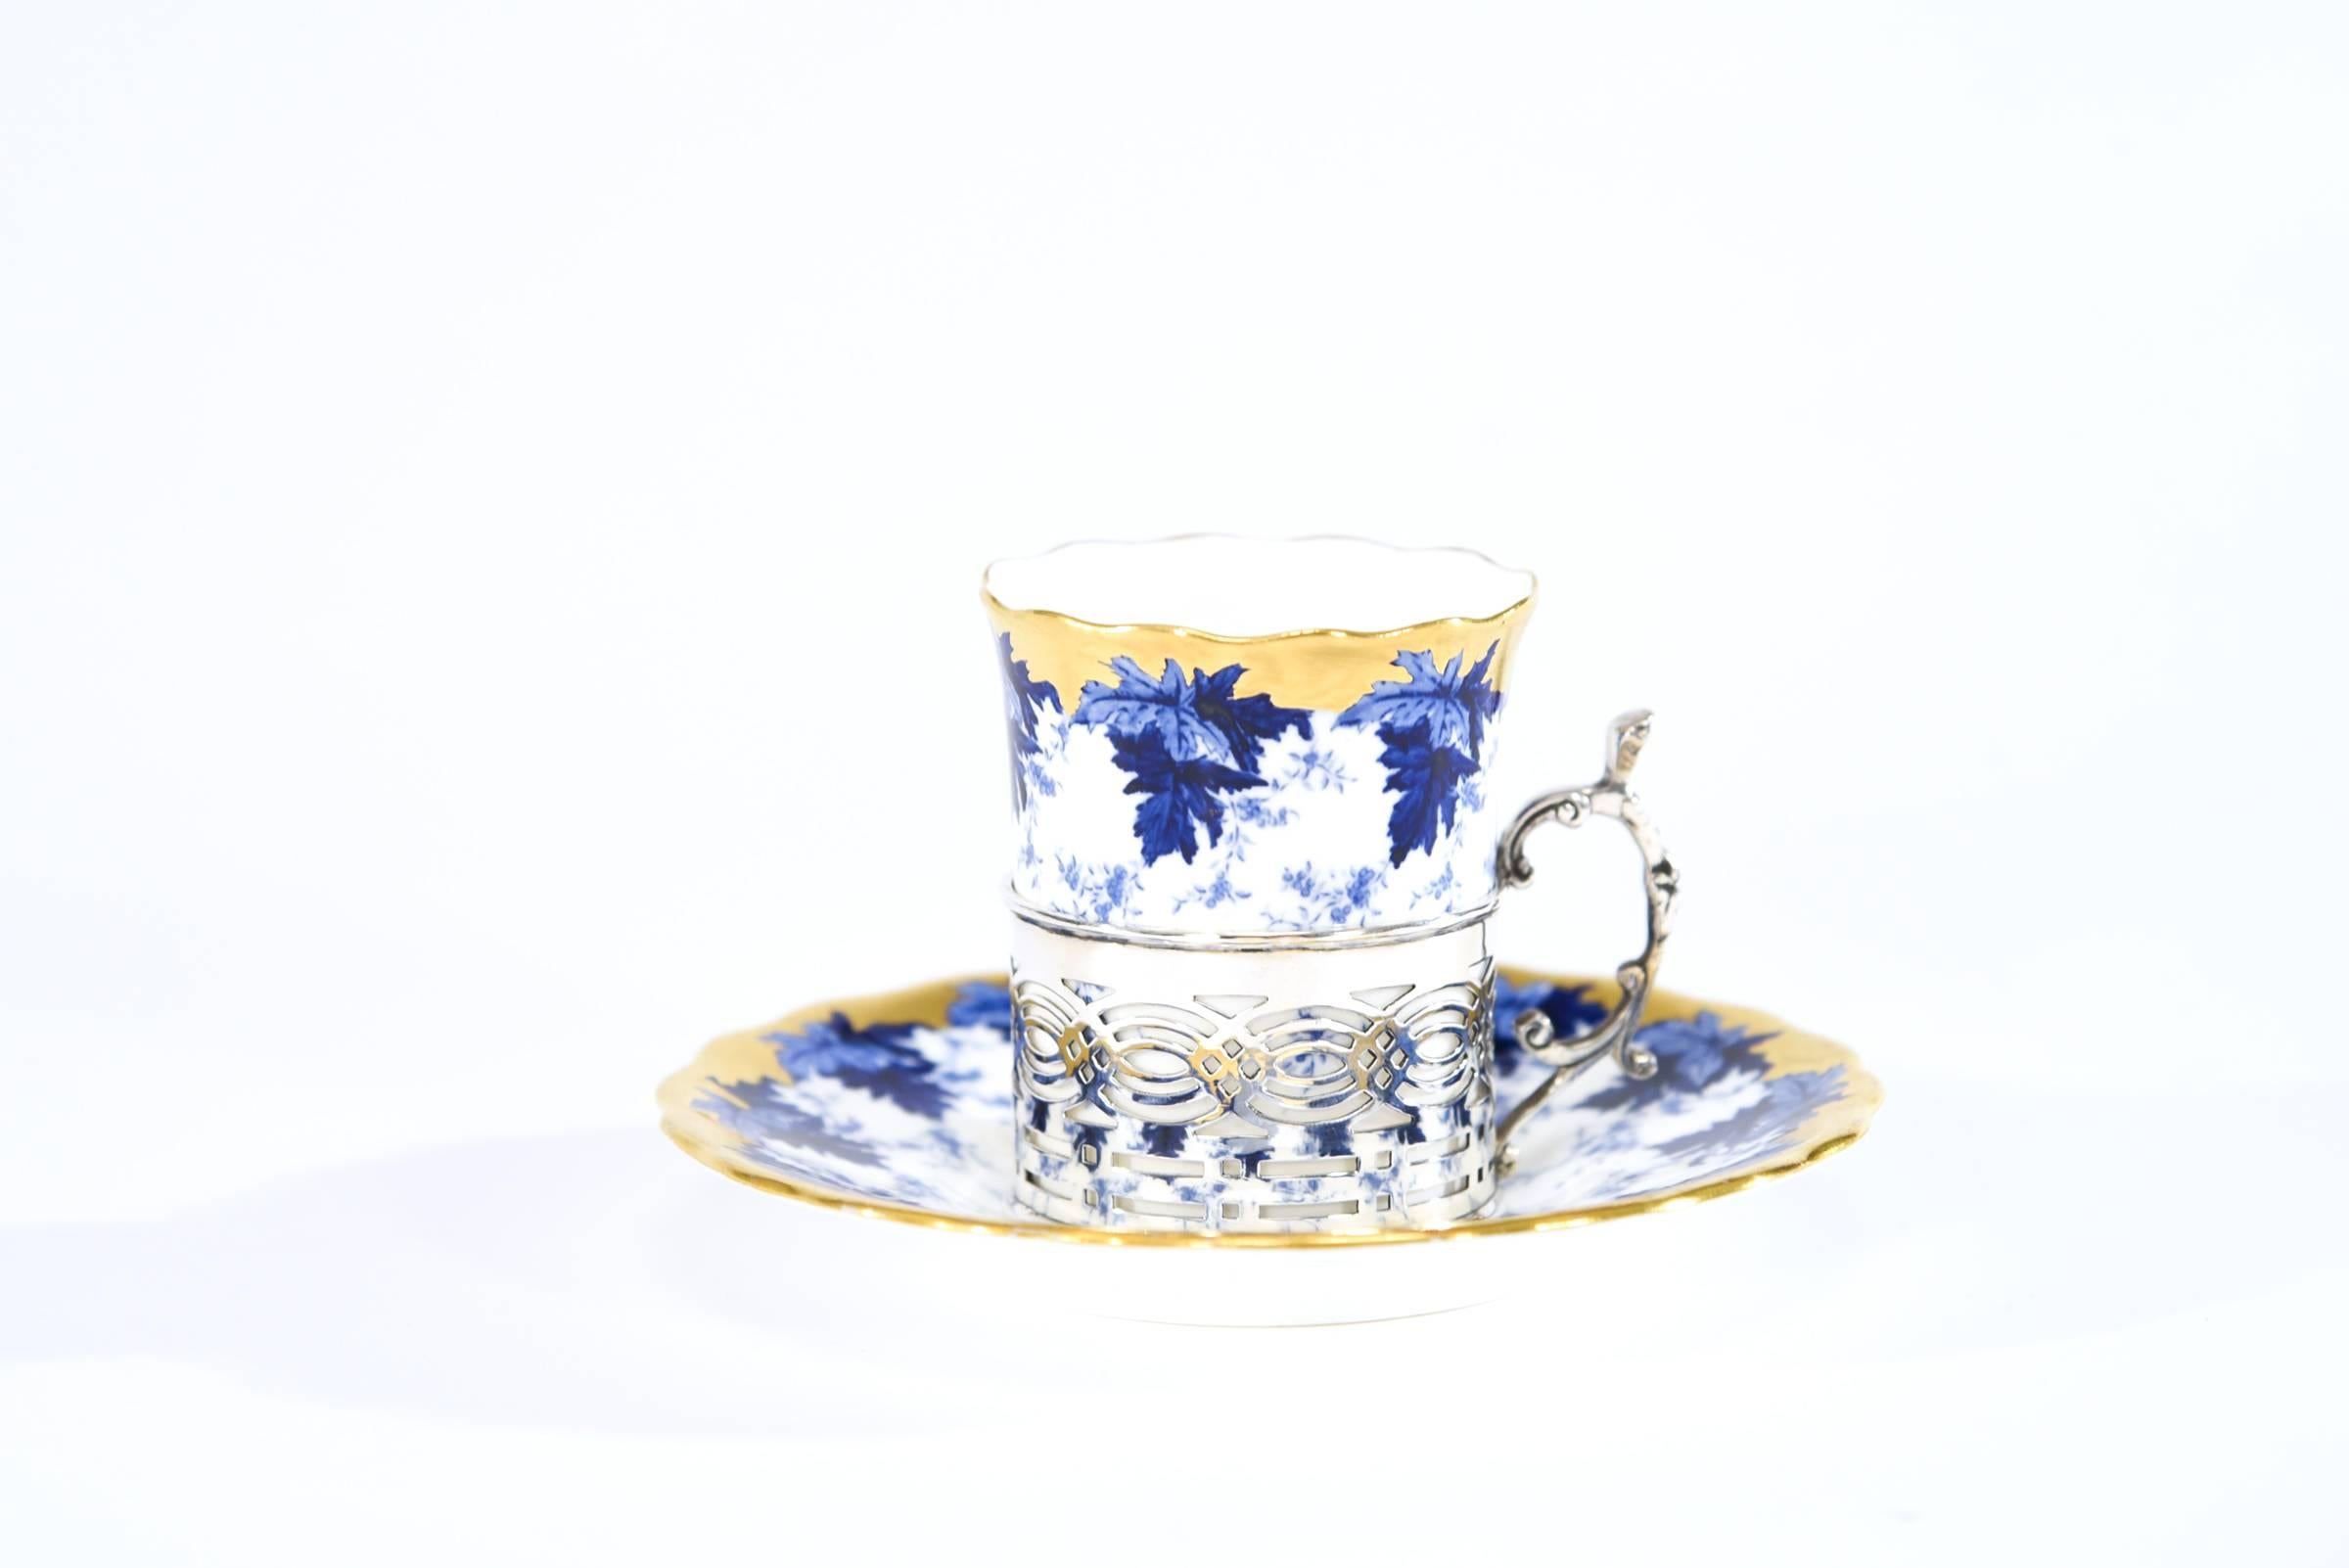 English Set of 12 Coalport Cups & Saucers W/ Cobalt, Gold, Sterling Silver Fittings